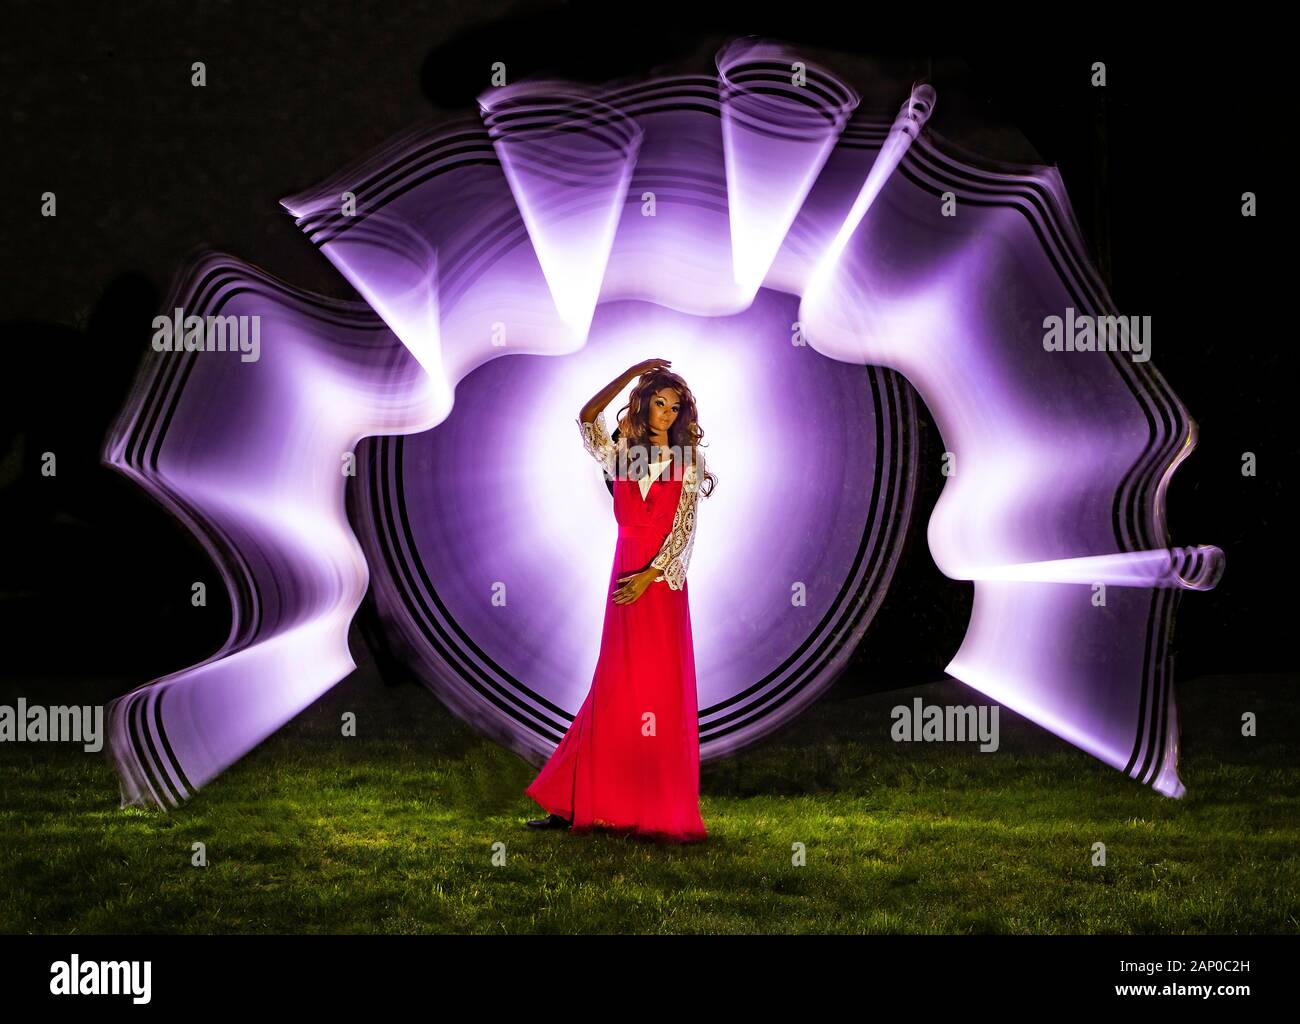 Example long exposure light photography with a manakin model (Sally Photo - Alamy